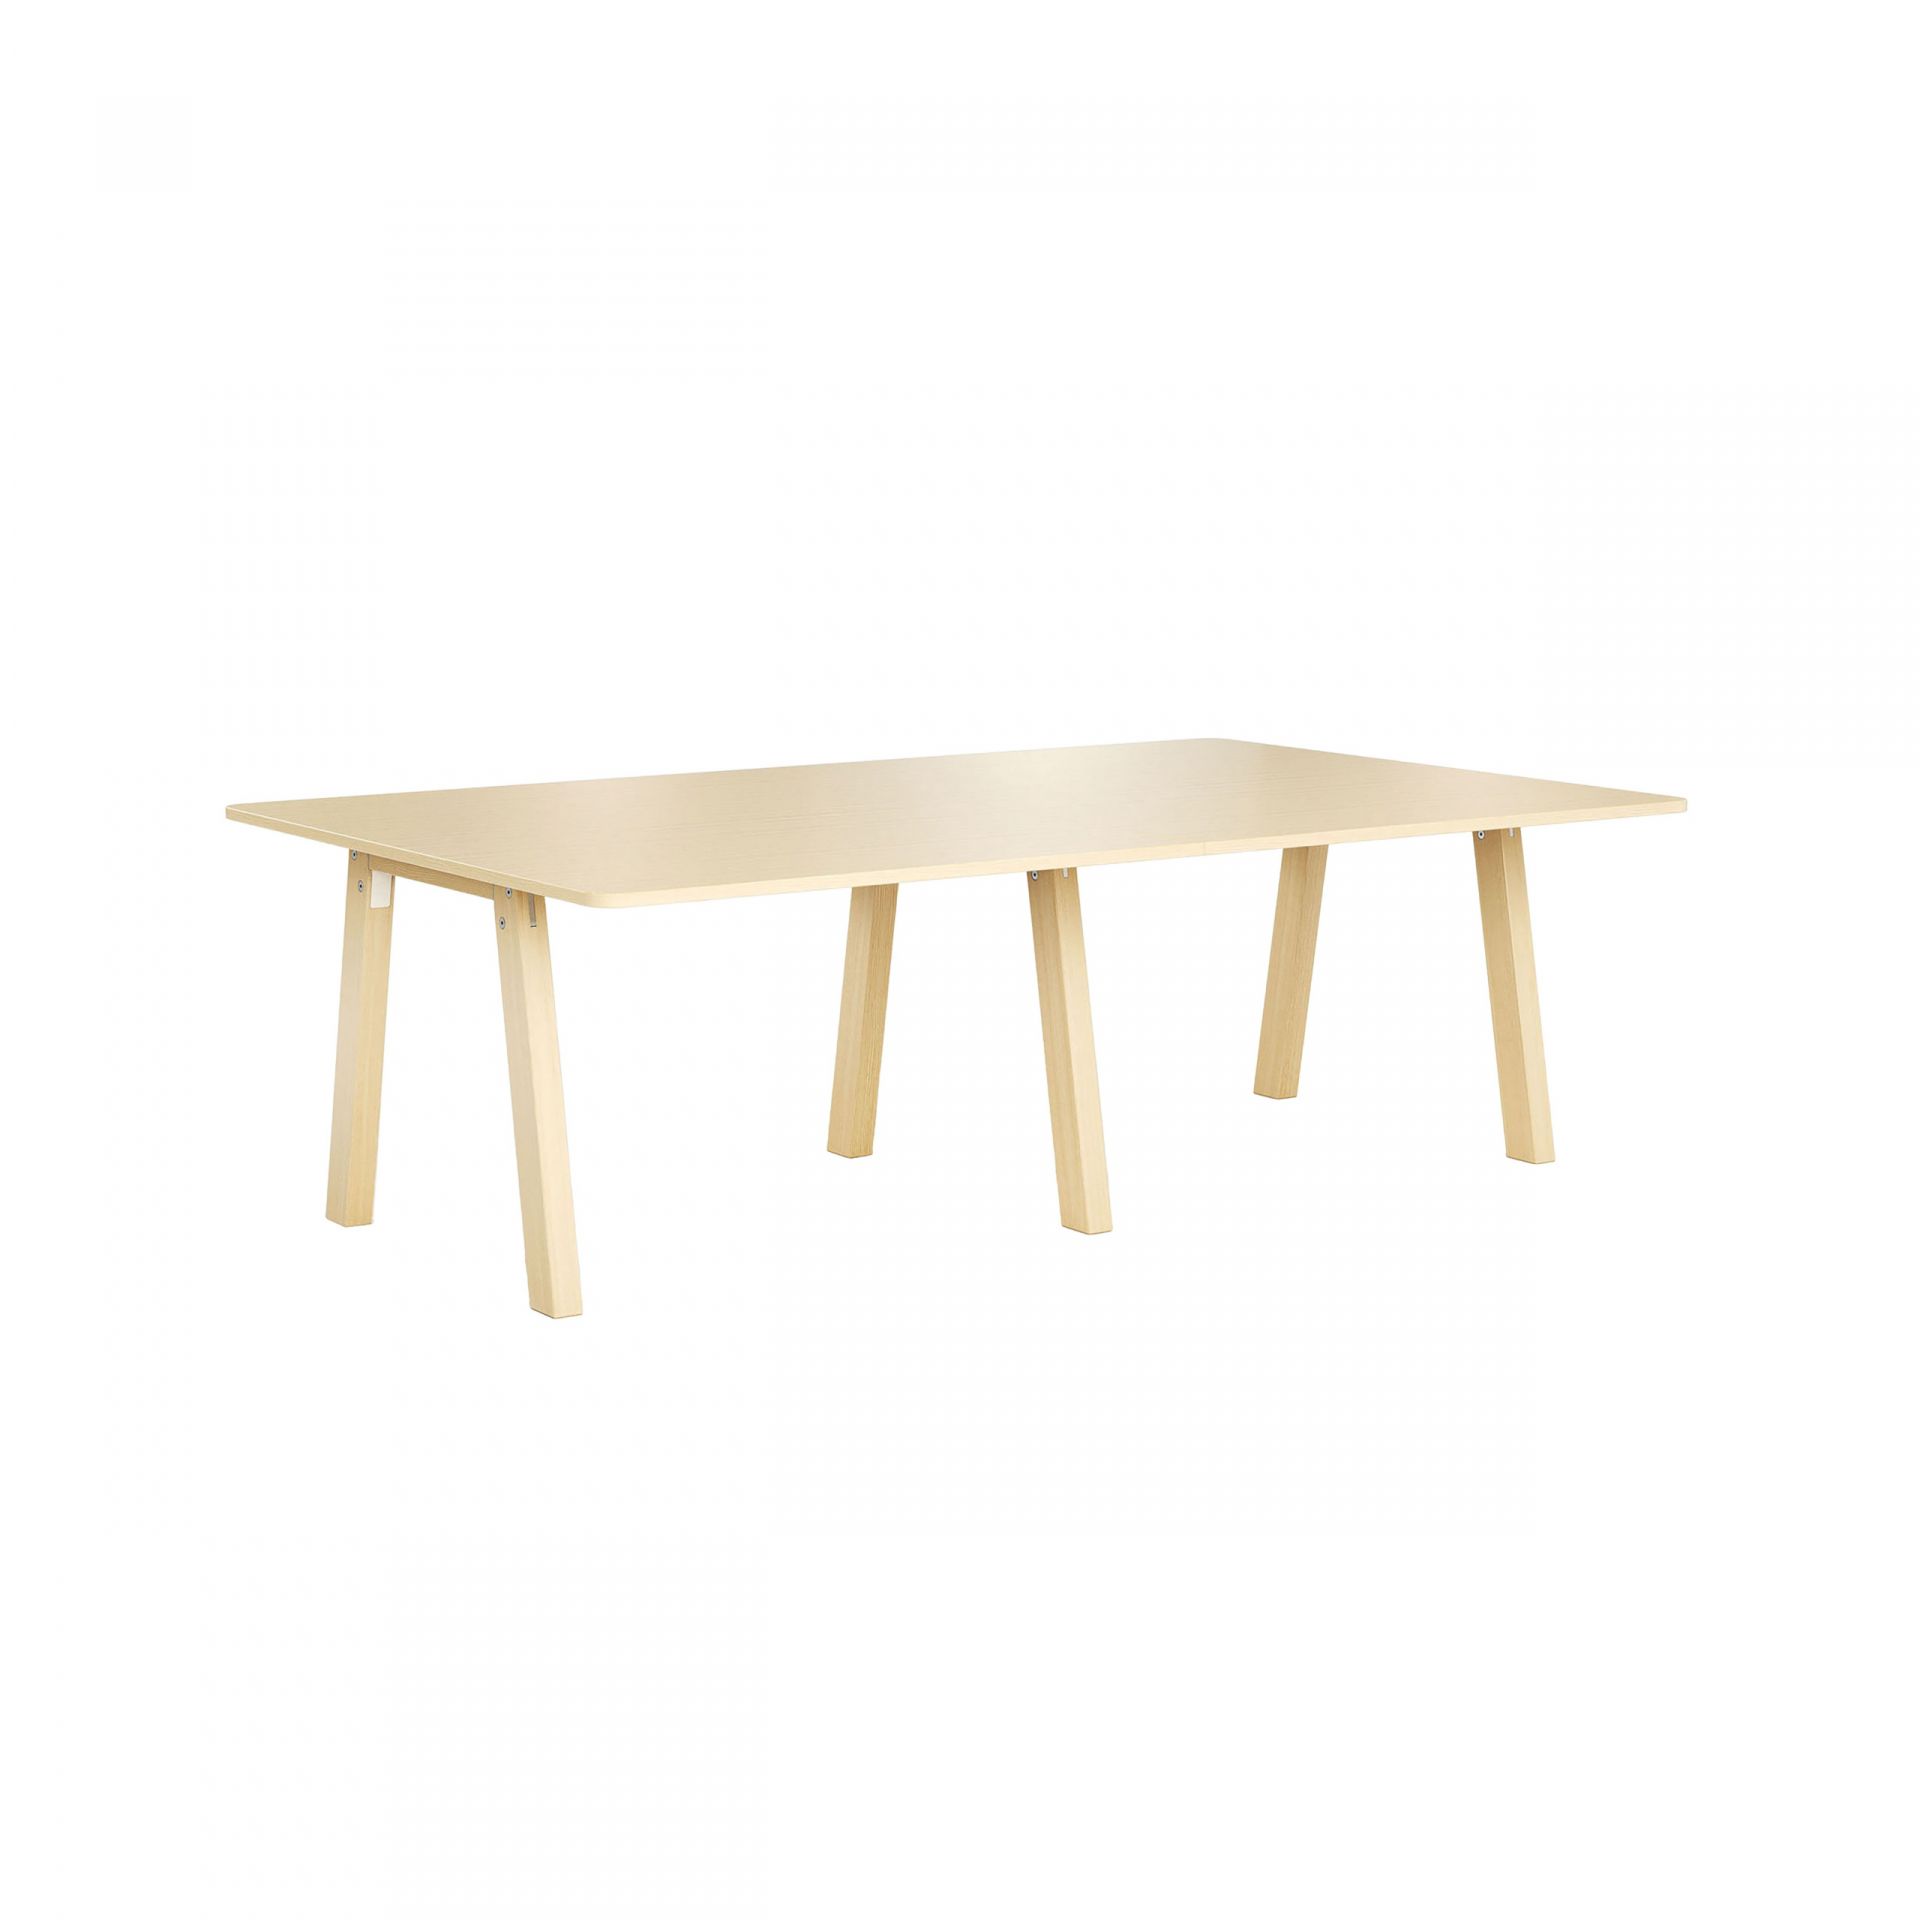 Collaborate Table with wodden legs product image 1